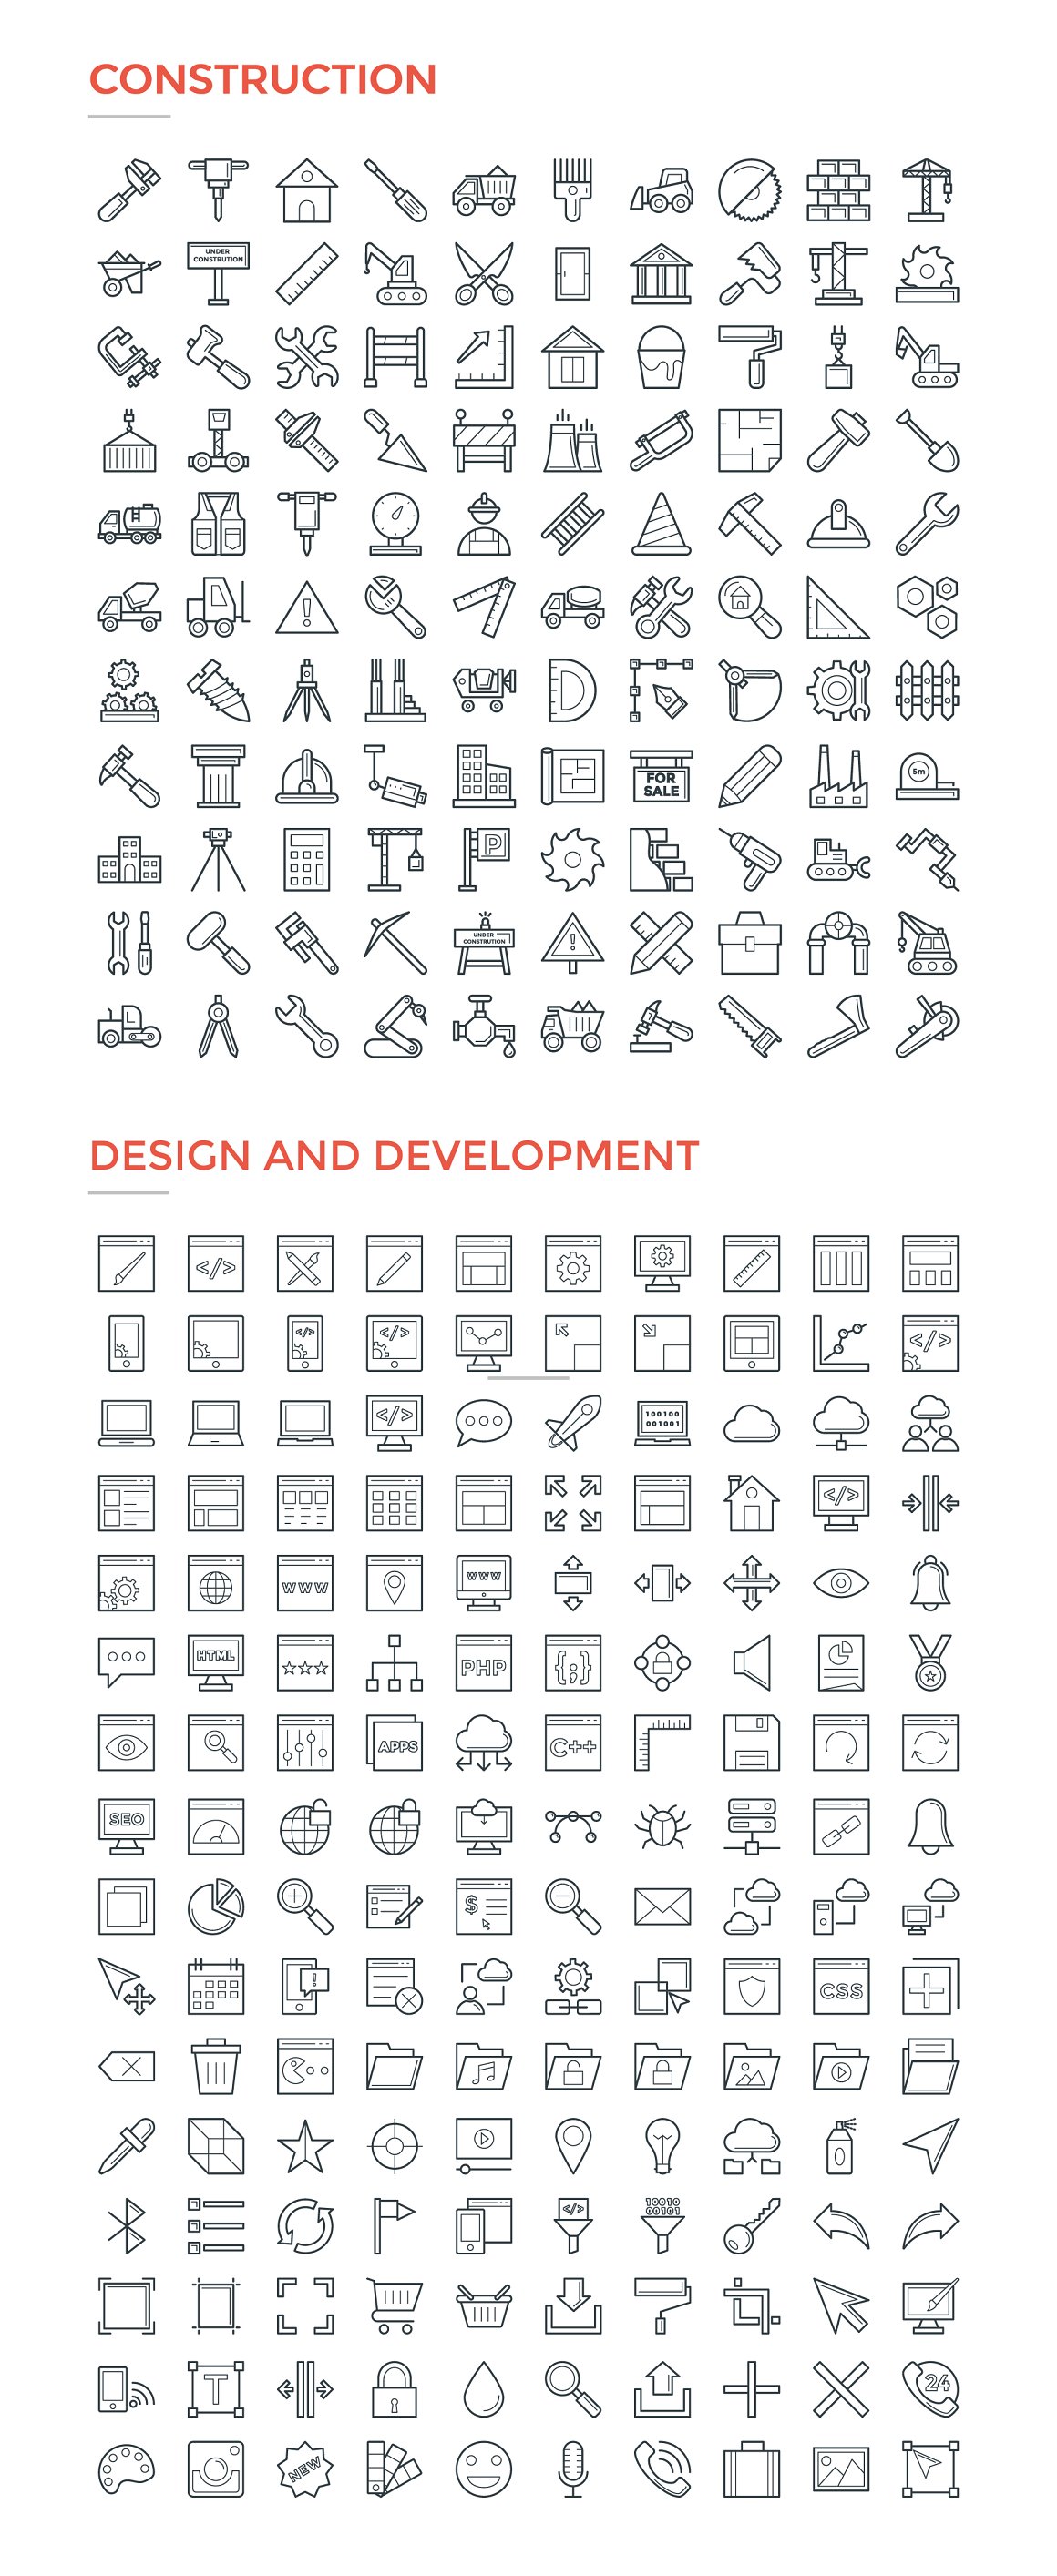 Bundle of construction and design & development icons on a white background.